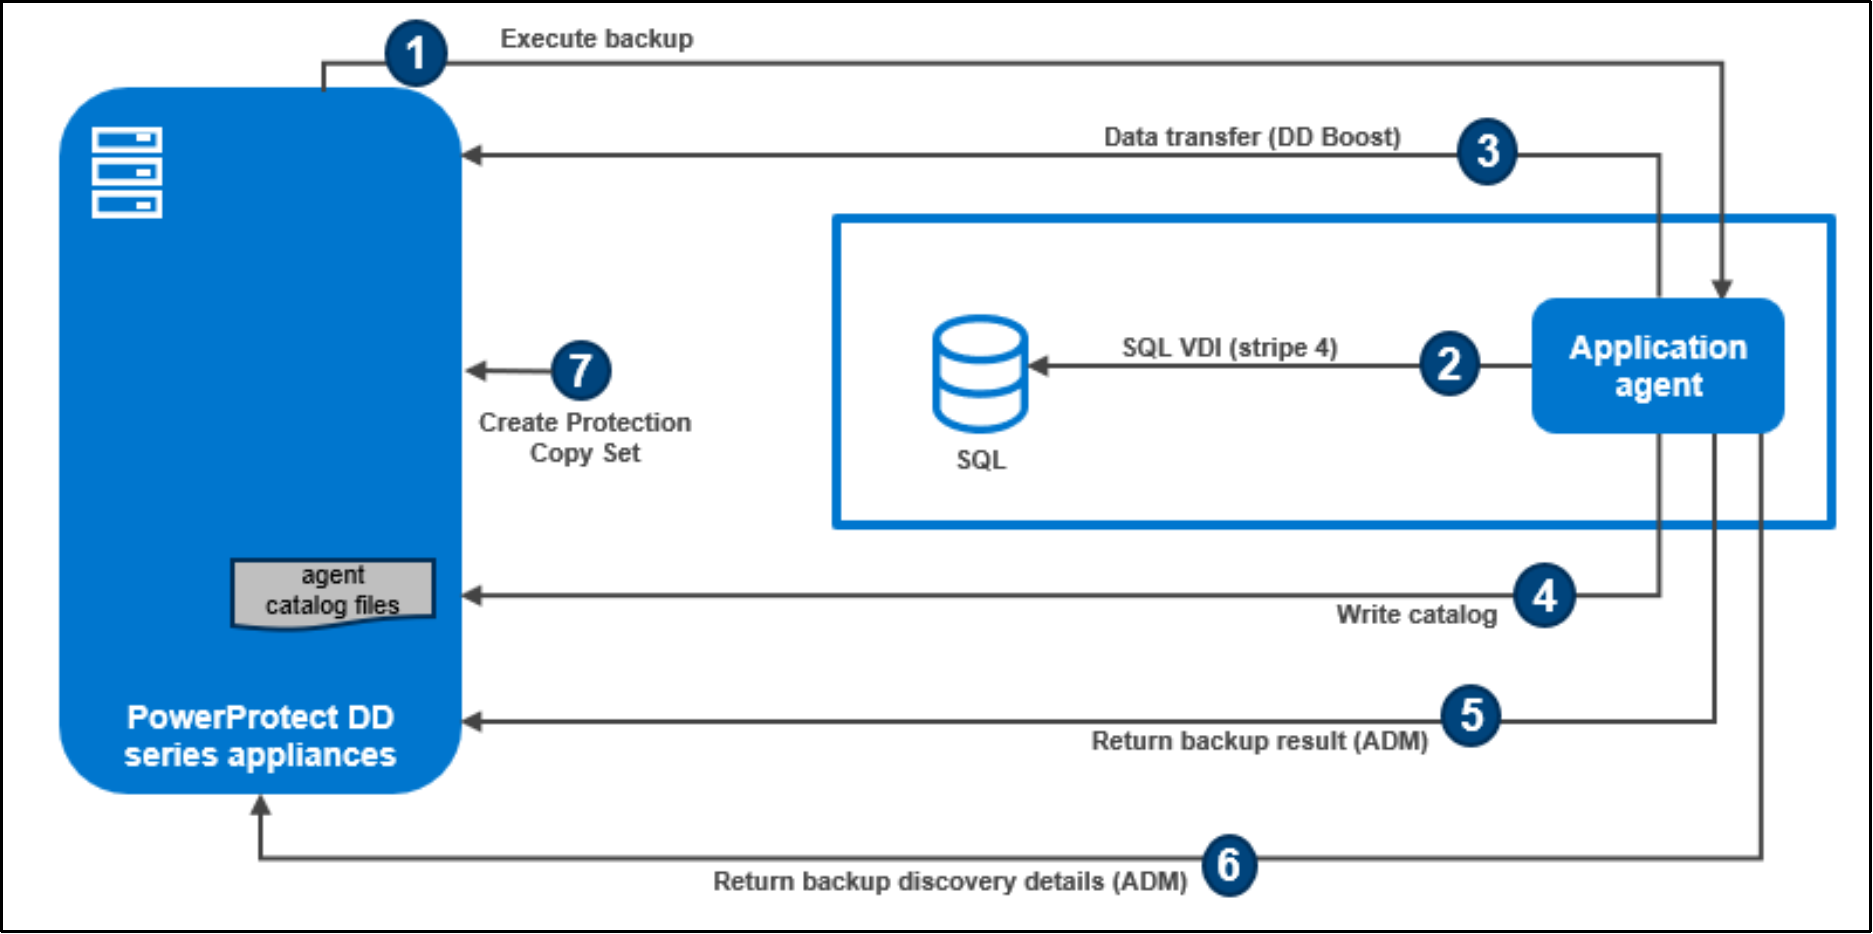 The image shows the Centralized Application Direct backup workflow (FULL)